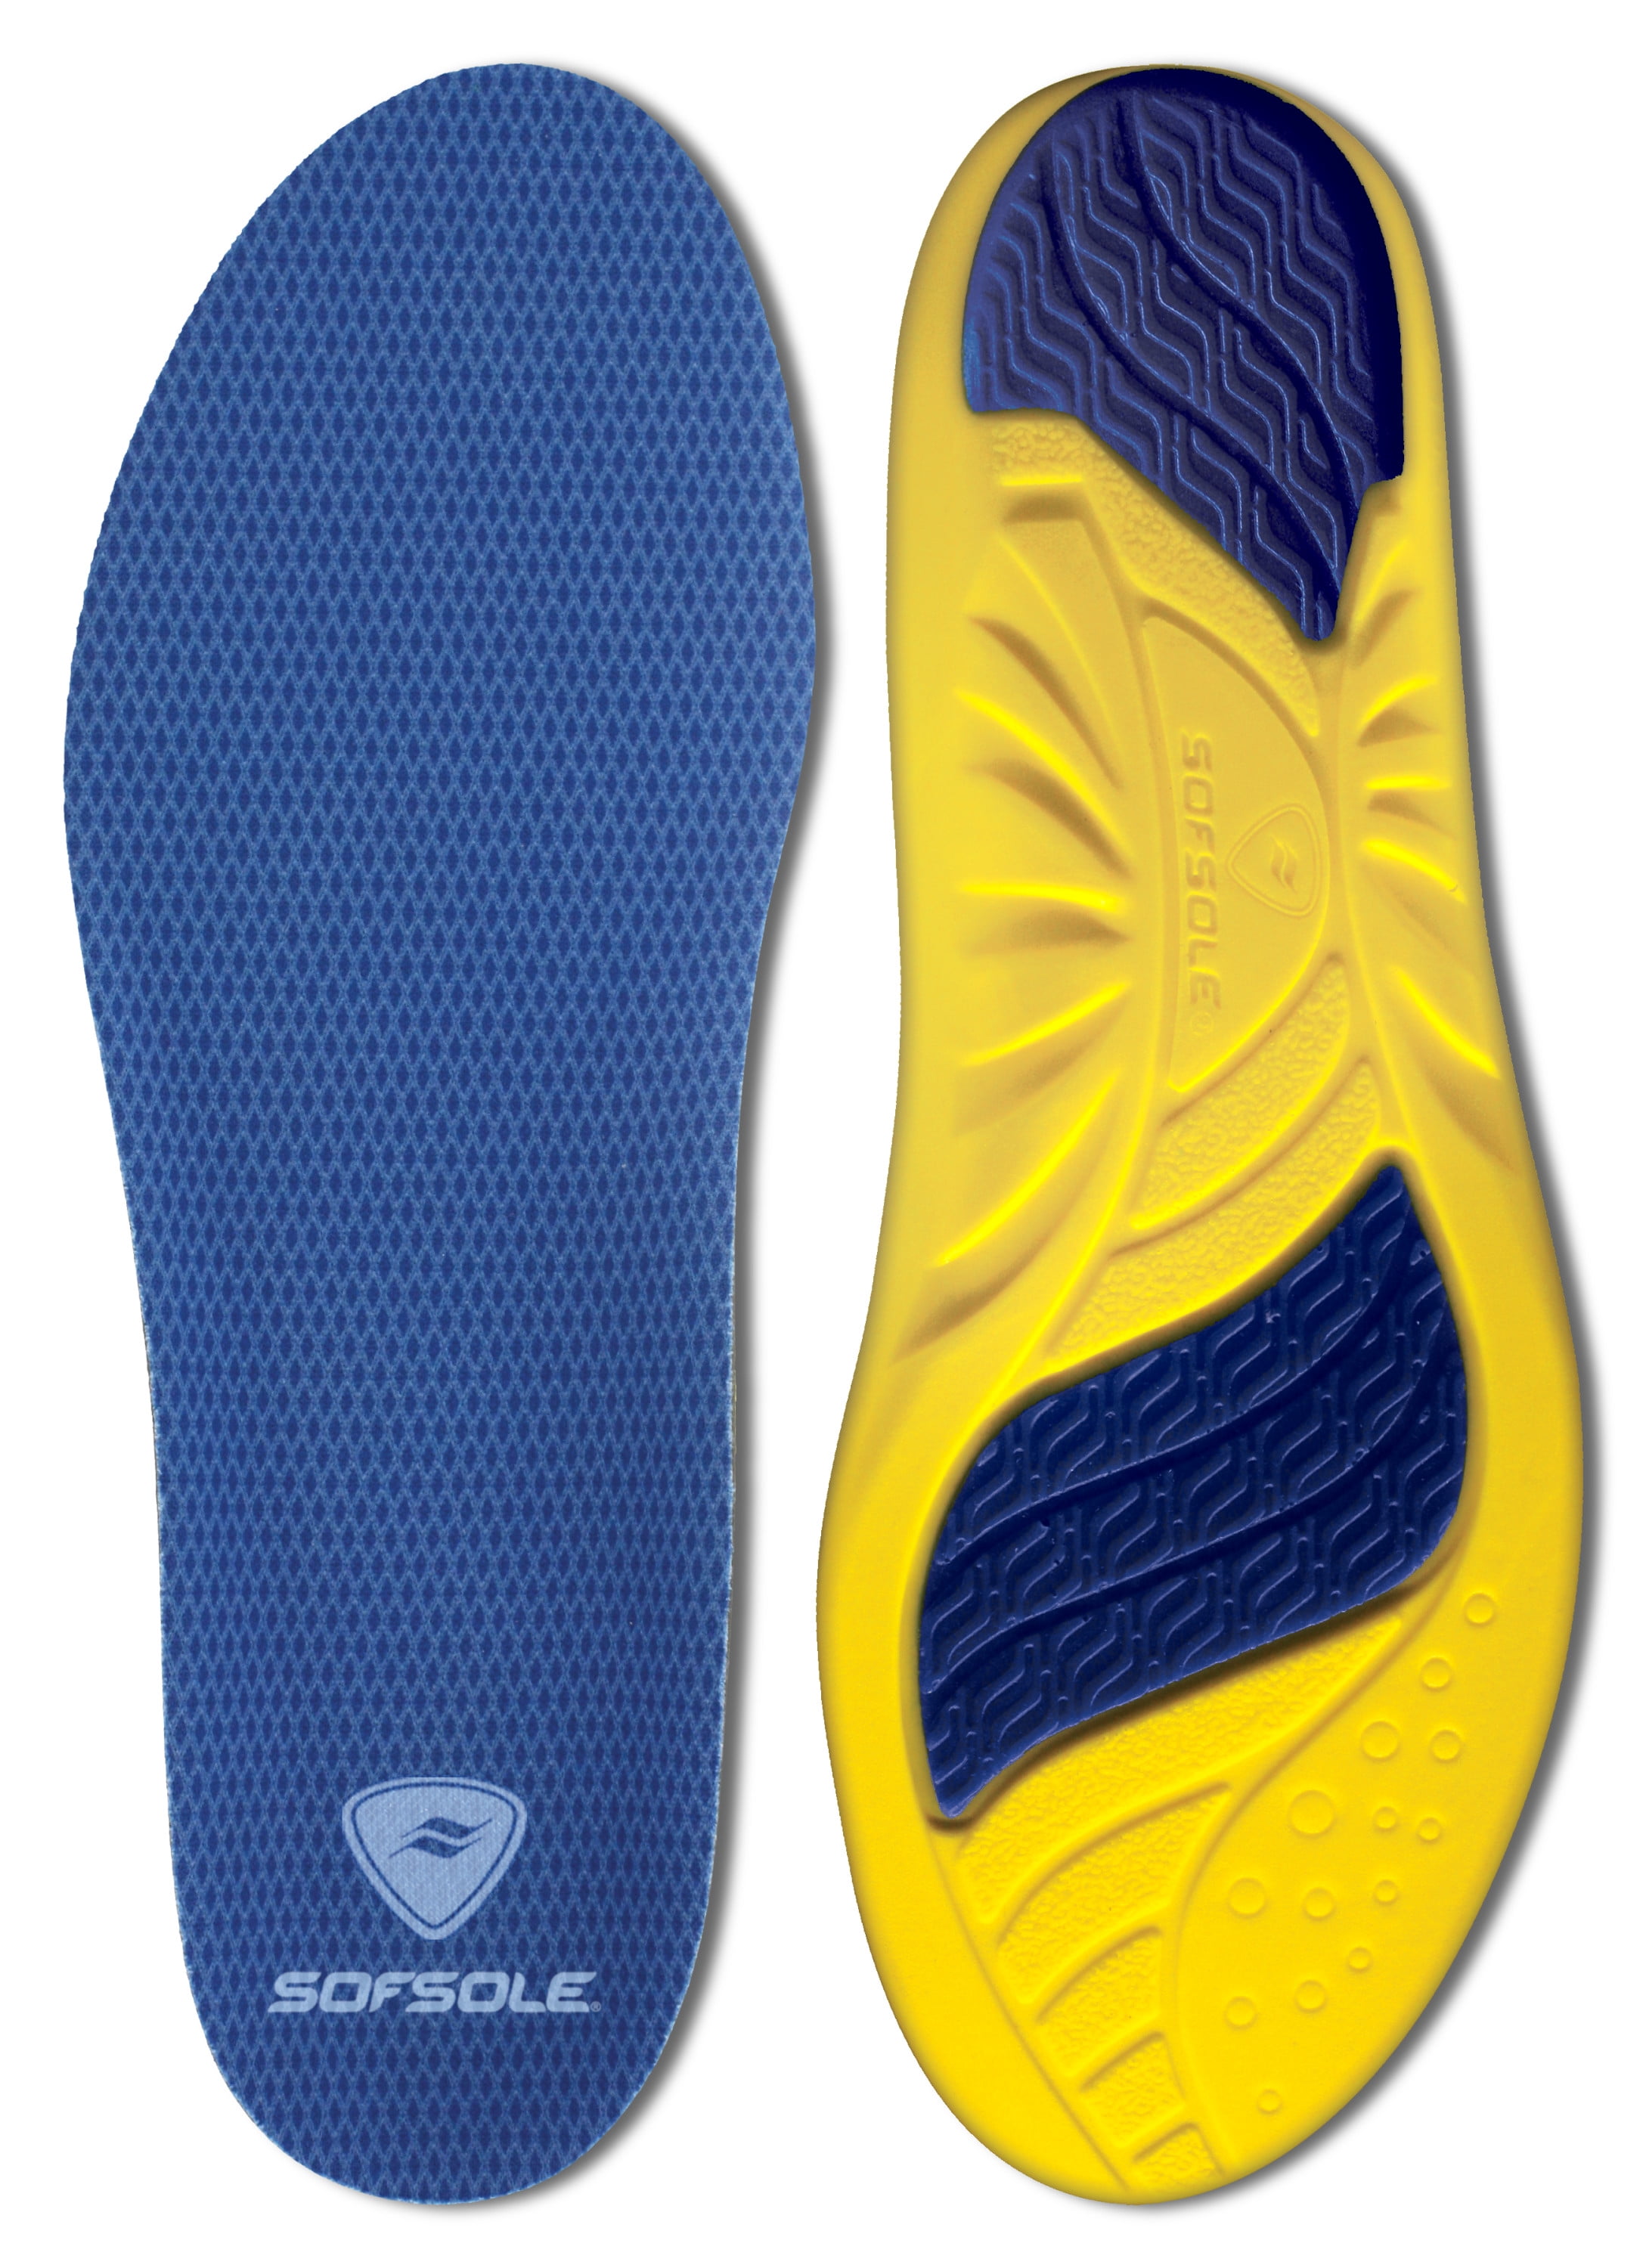 size 16 insoles